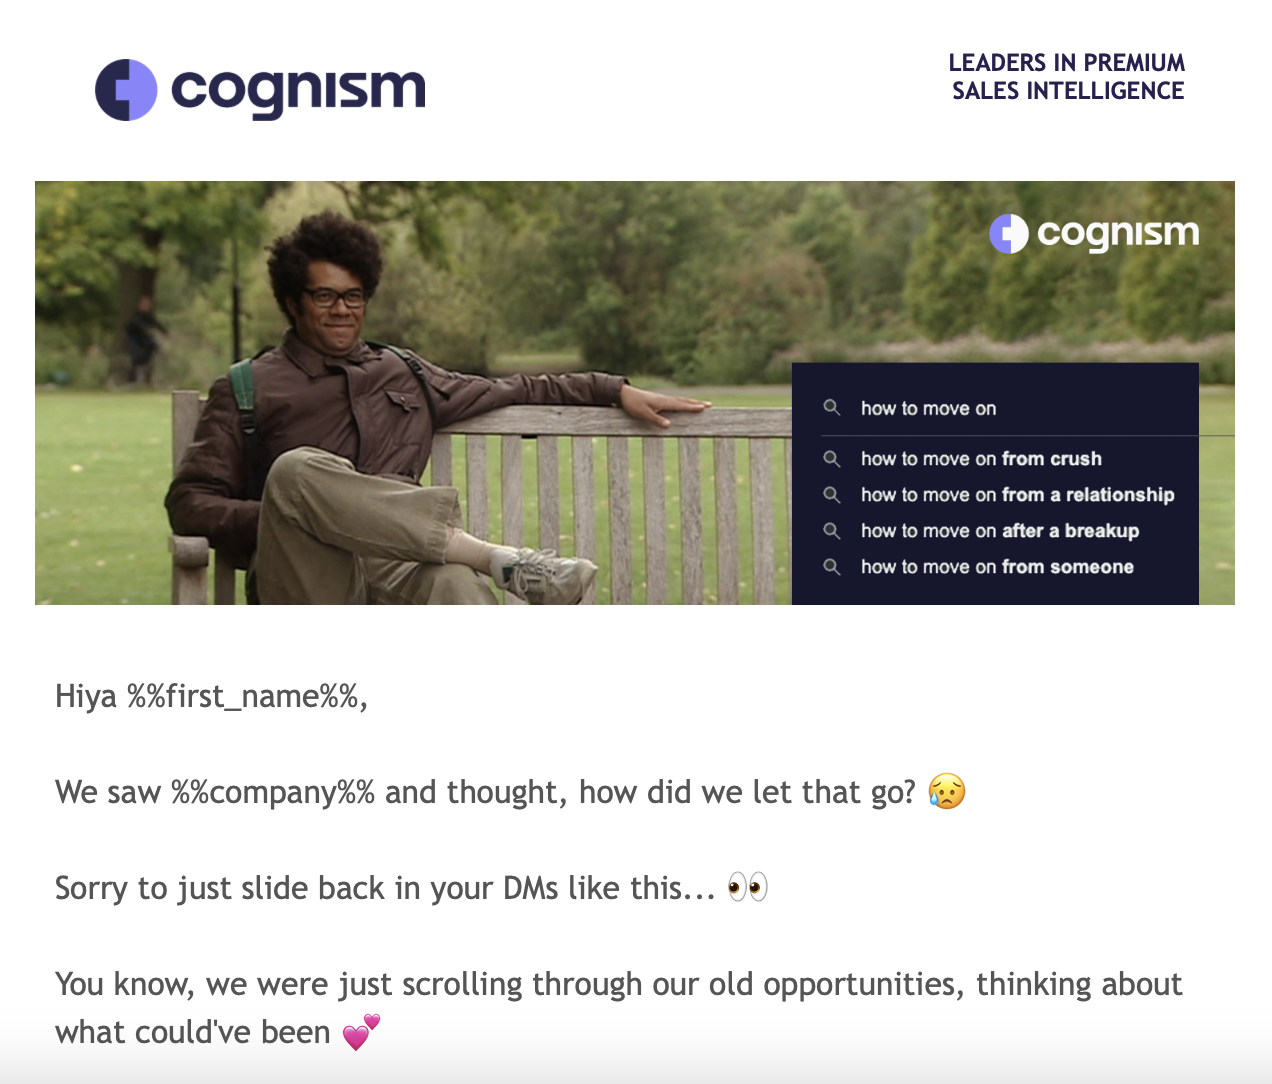 A B2B marketing strategy example of how Cognism uses nurture campaigns to retarget leads.